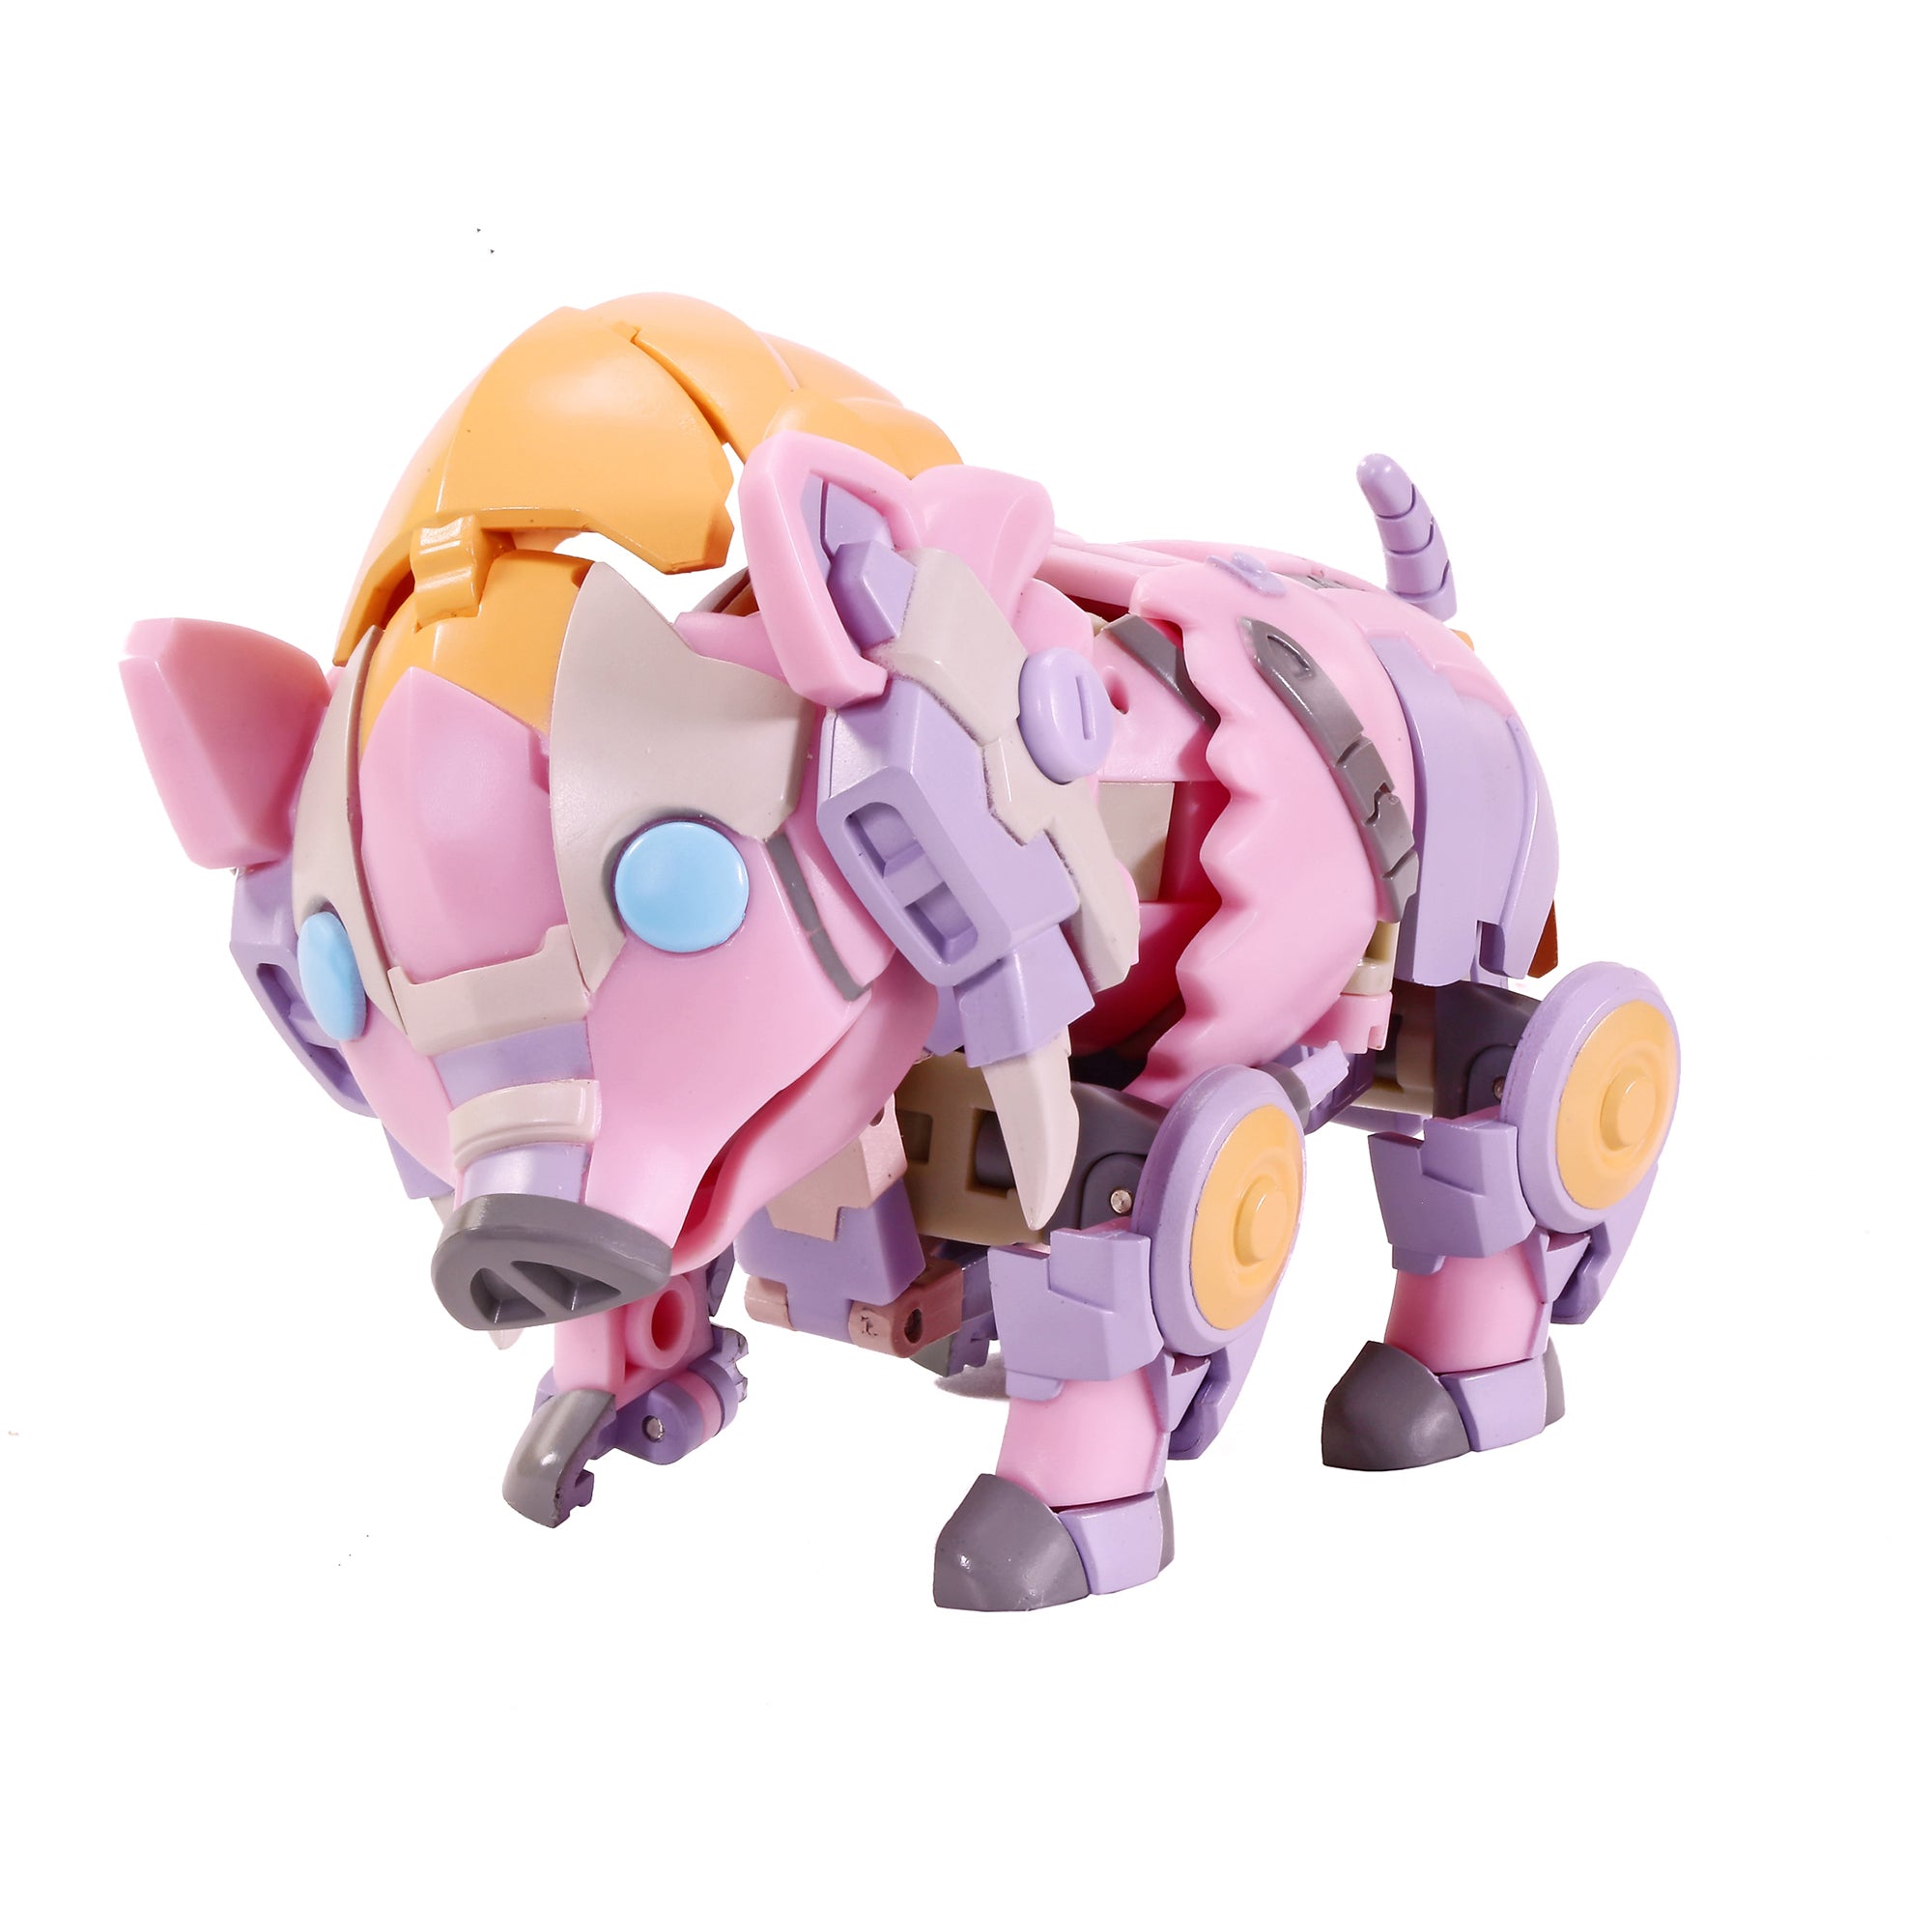 Toy Notch - Adventure Cloud - FA-02C - Taro Oink (limited edition) - Marvelous Toys